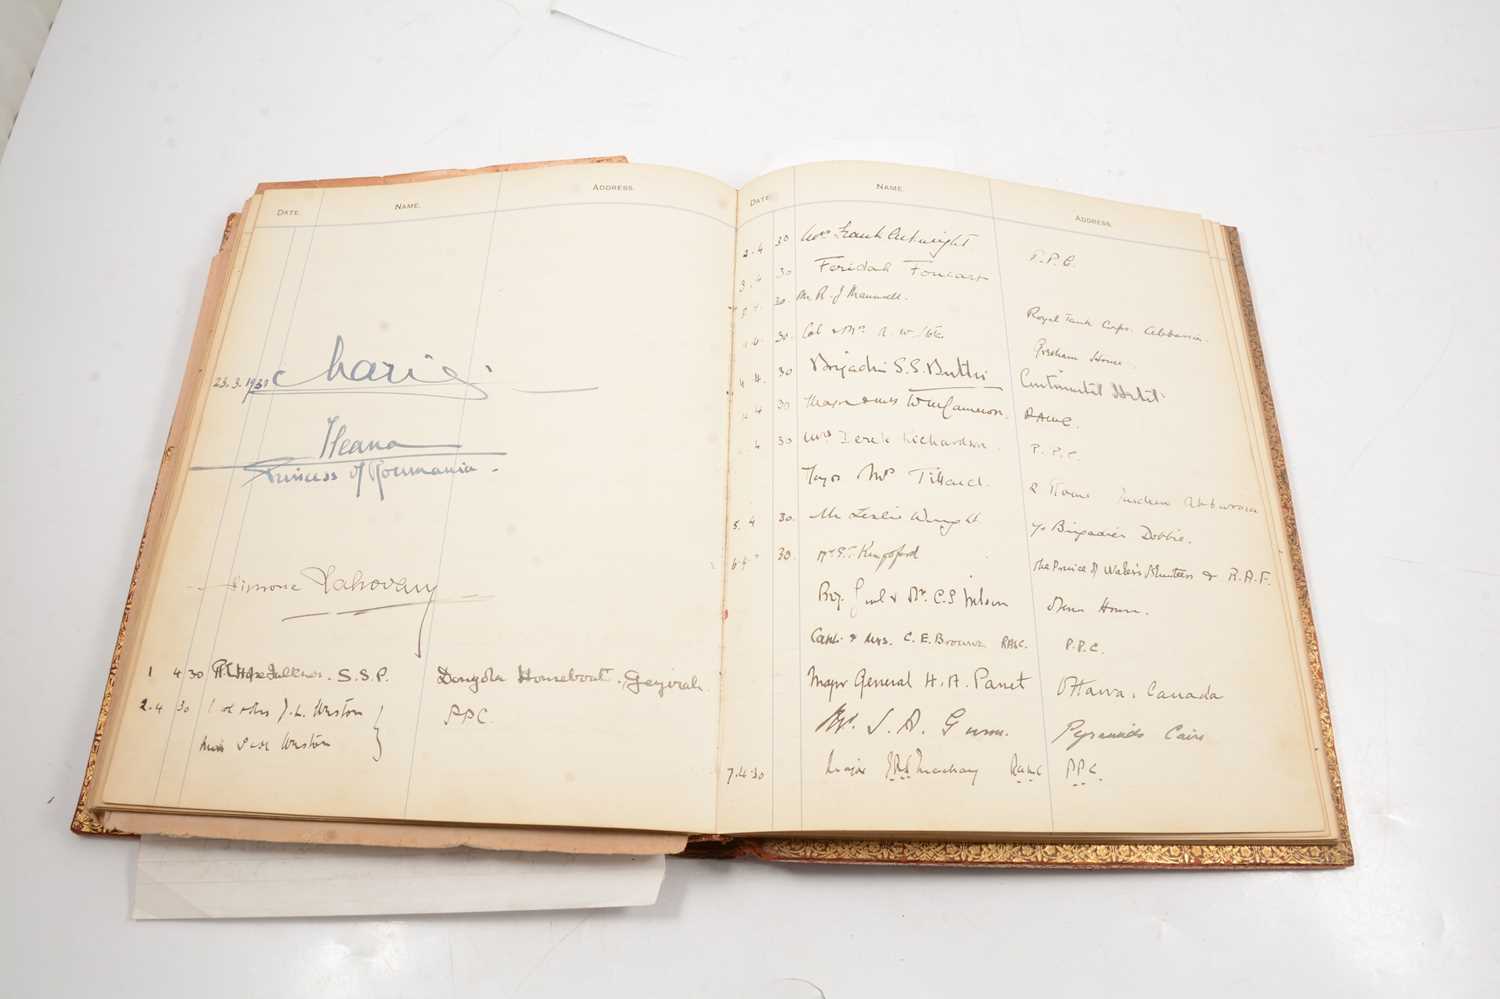 A visitors’ book for the GOC (General Officer Commanding) in Cairo dating to 1927-31. - Image 3 of 4